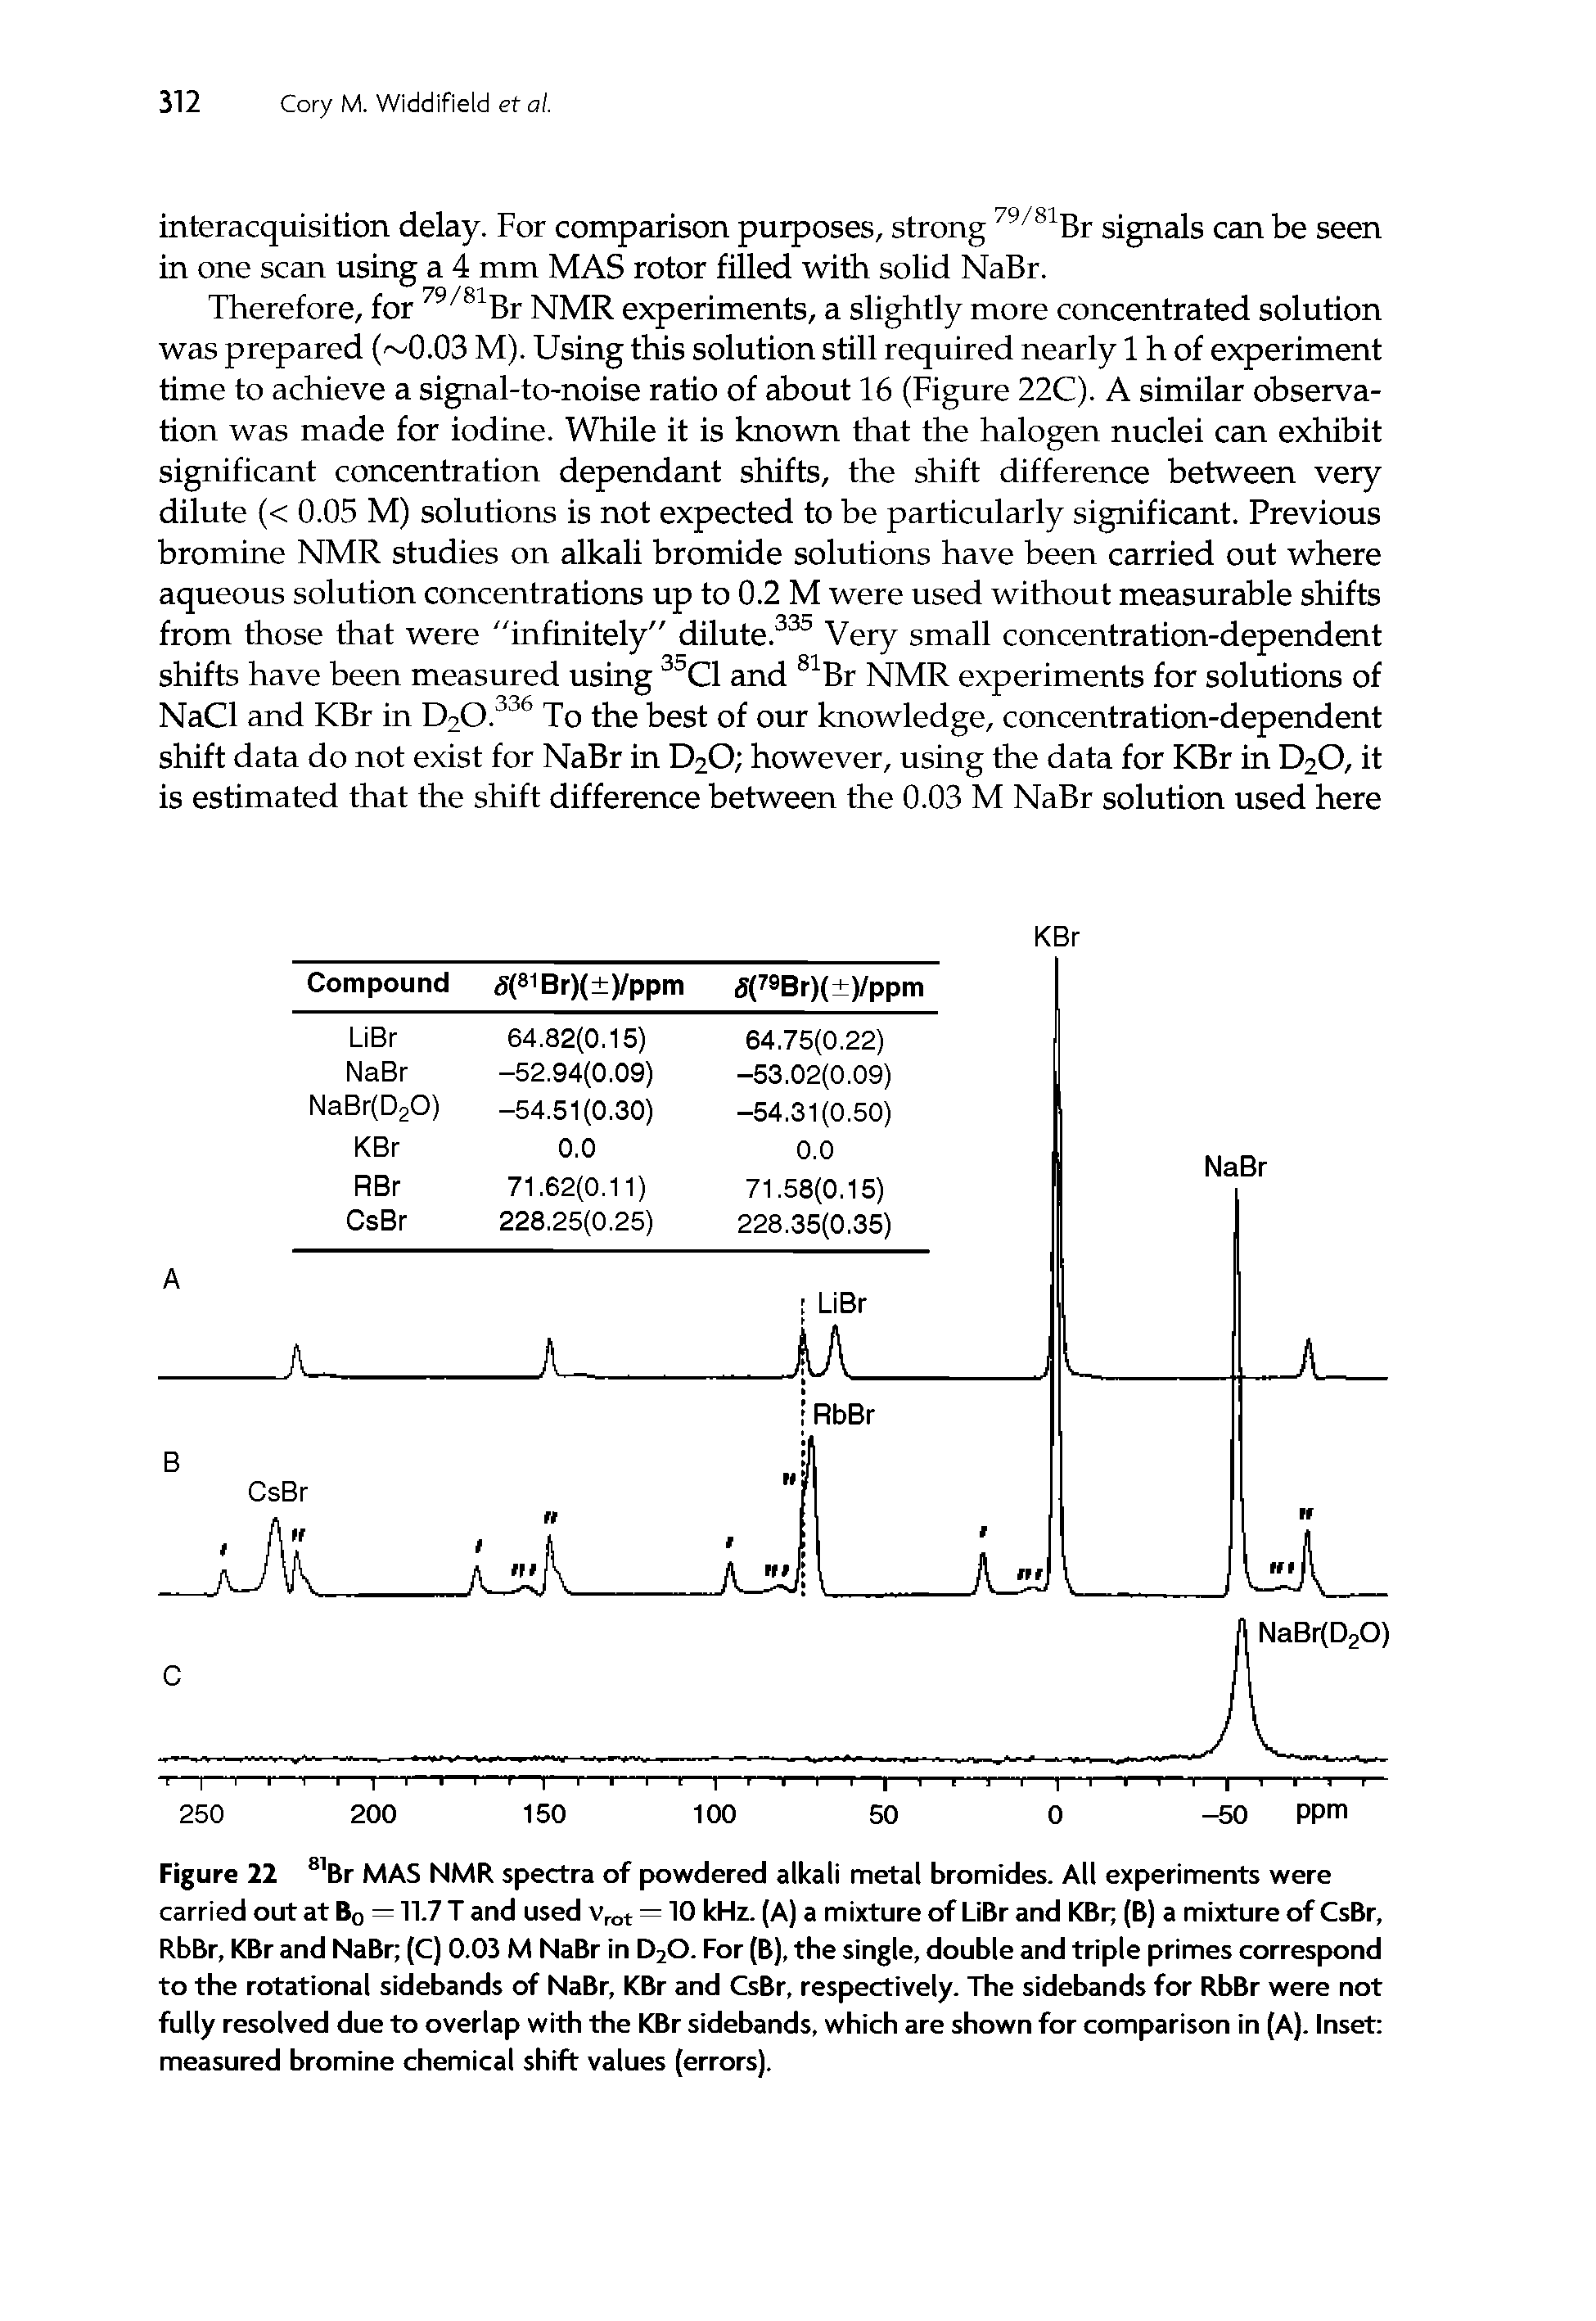 Figure 22 Br MAS NMR spectra of powdered alkali metal bromides. All experiments were carried outat Bq = 11.7T and used v,ot = 10 kHz. (A) a mixture of LiBr and KBr (B) a mixture of CsBr, RbBr, KBr and NaBr (C) 0.03 M NaBr in D2O. For (B), the single, double and triple primes correspond to the rotational sidebands of NaBr, KBr and CsBr, respectively. The sidebands for RbBr were not fully resolved due to overlap with the KBr sidebands, which are shown for comparison in (A). Inset measured bromine chemical shift values (errors).